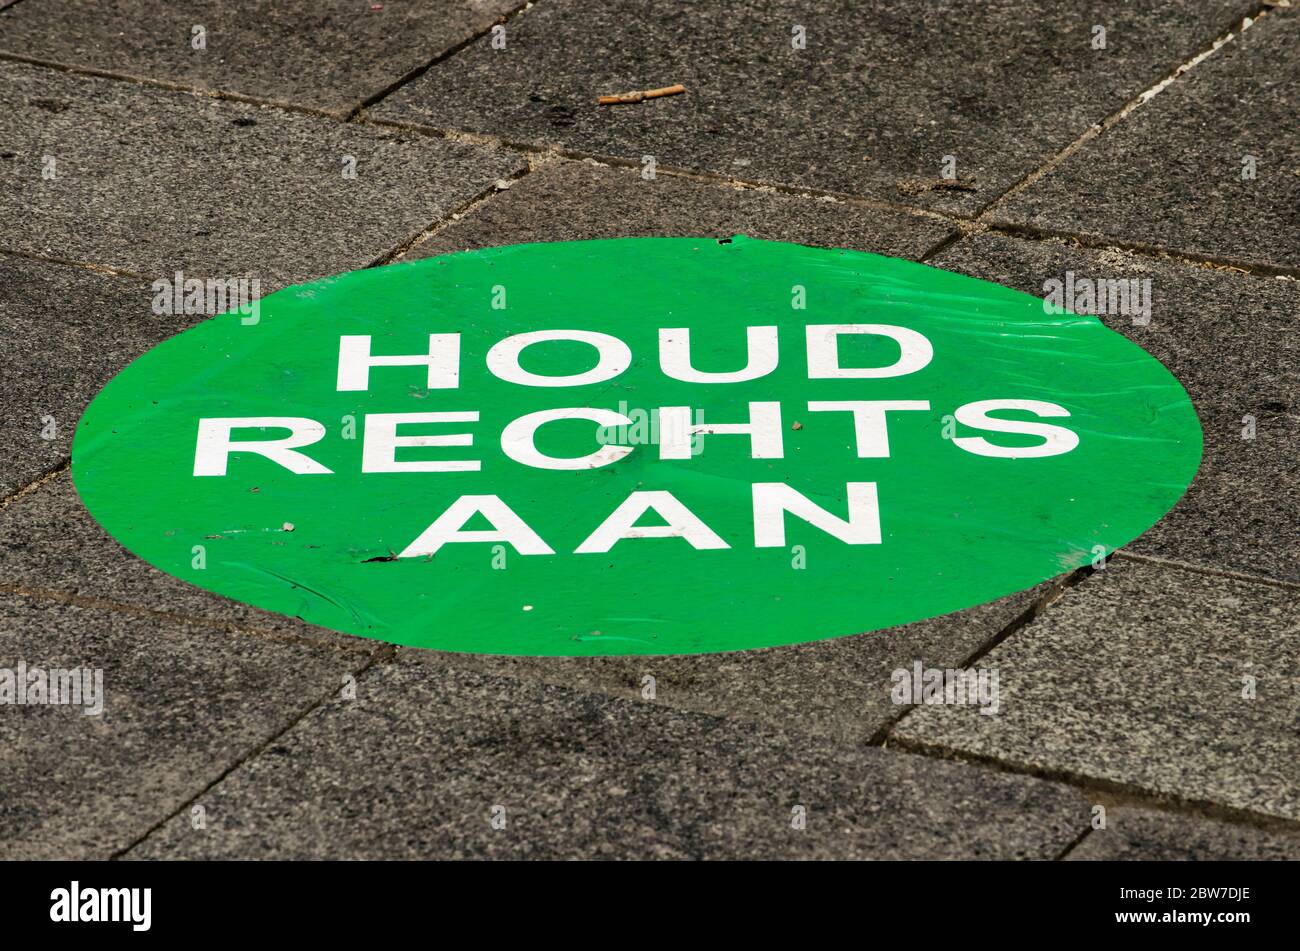 Rotterdam, The Netherlands, May 17, 2020: Large green sticker on pavement in Lijnbaan shopping street asking pedestrians to keep right to prevent spre Stock Photo